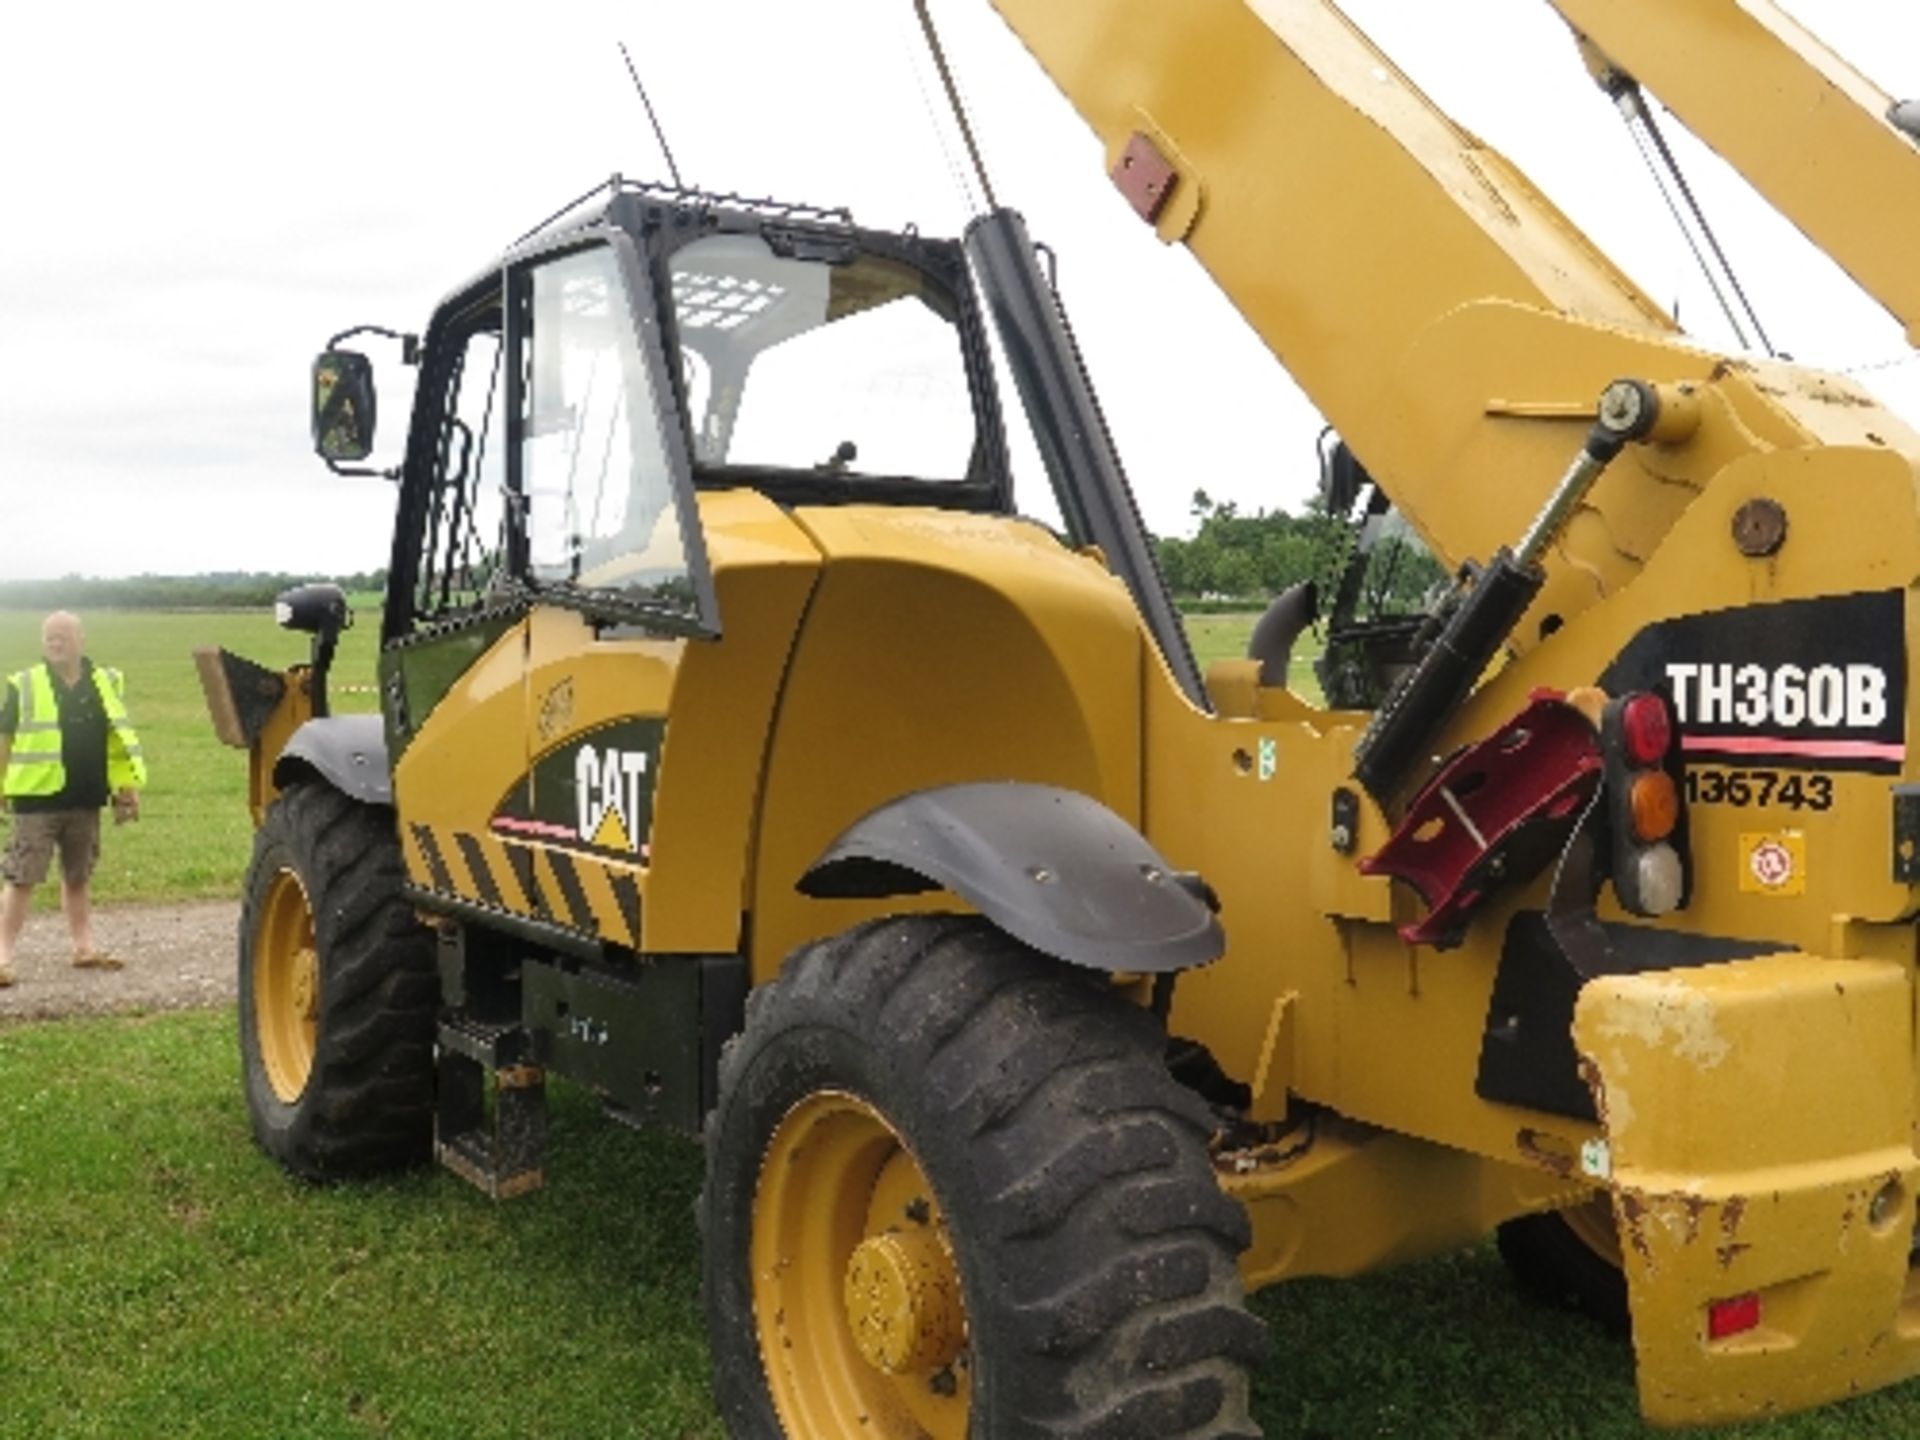 Caterpillar TH360B telehandler 3545 hrs 136743
BELIEVED 2005
ALL LOTS are SOLD AS SEEN WITHOUT - Image 4 of 7